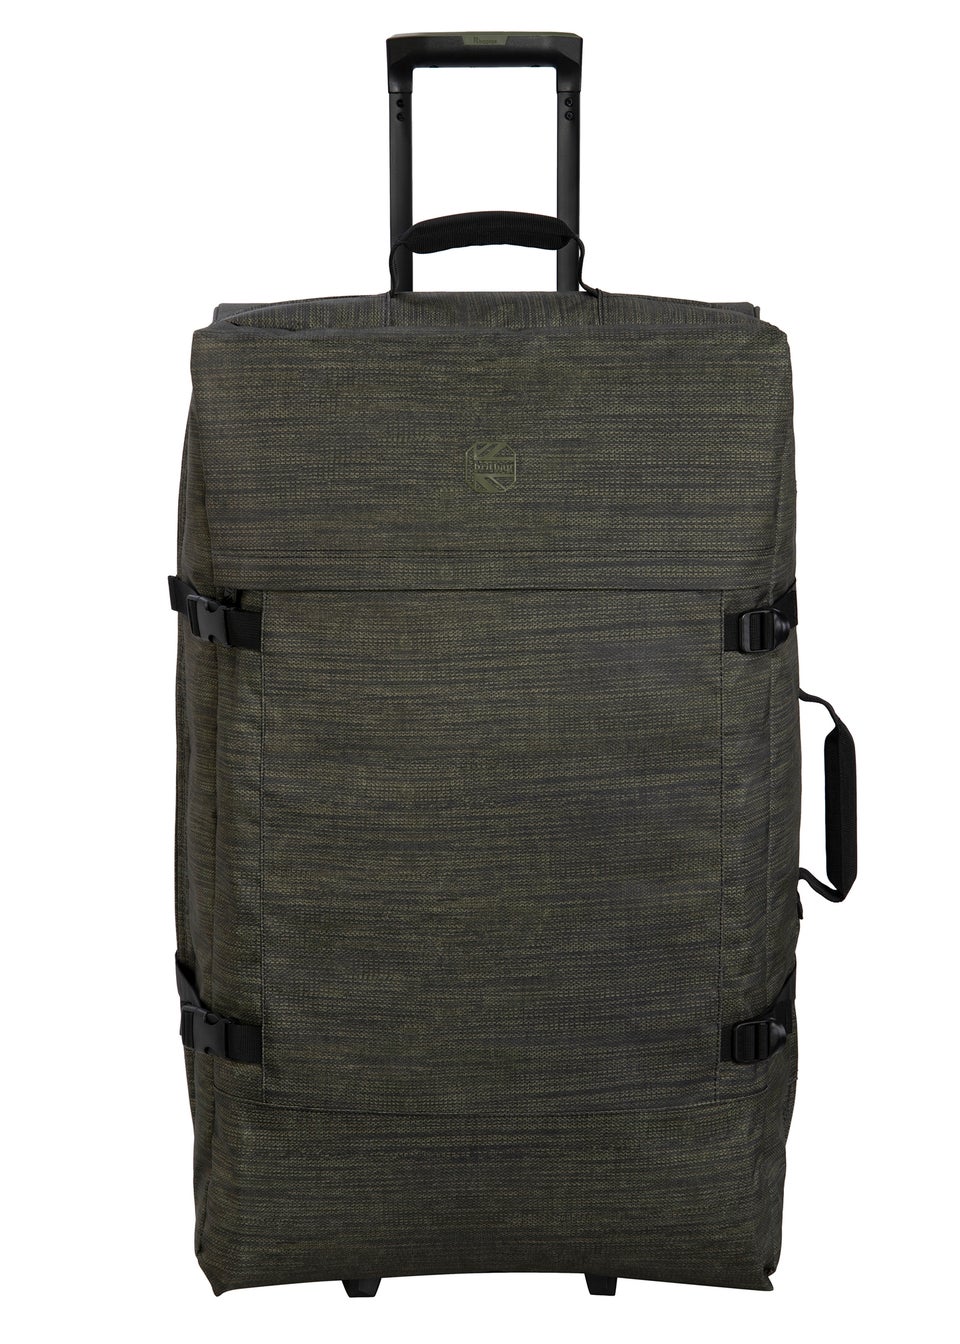 BritBag Maputo Dusty Green Large Suitcase